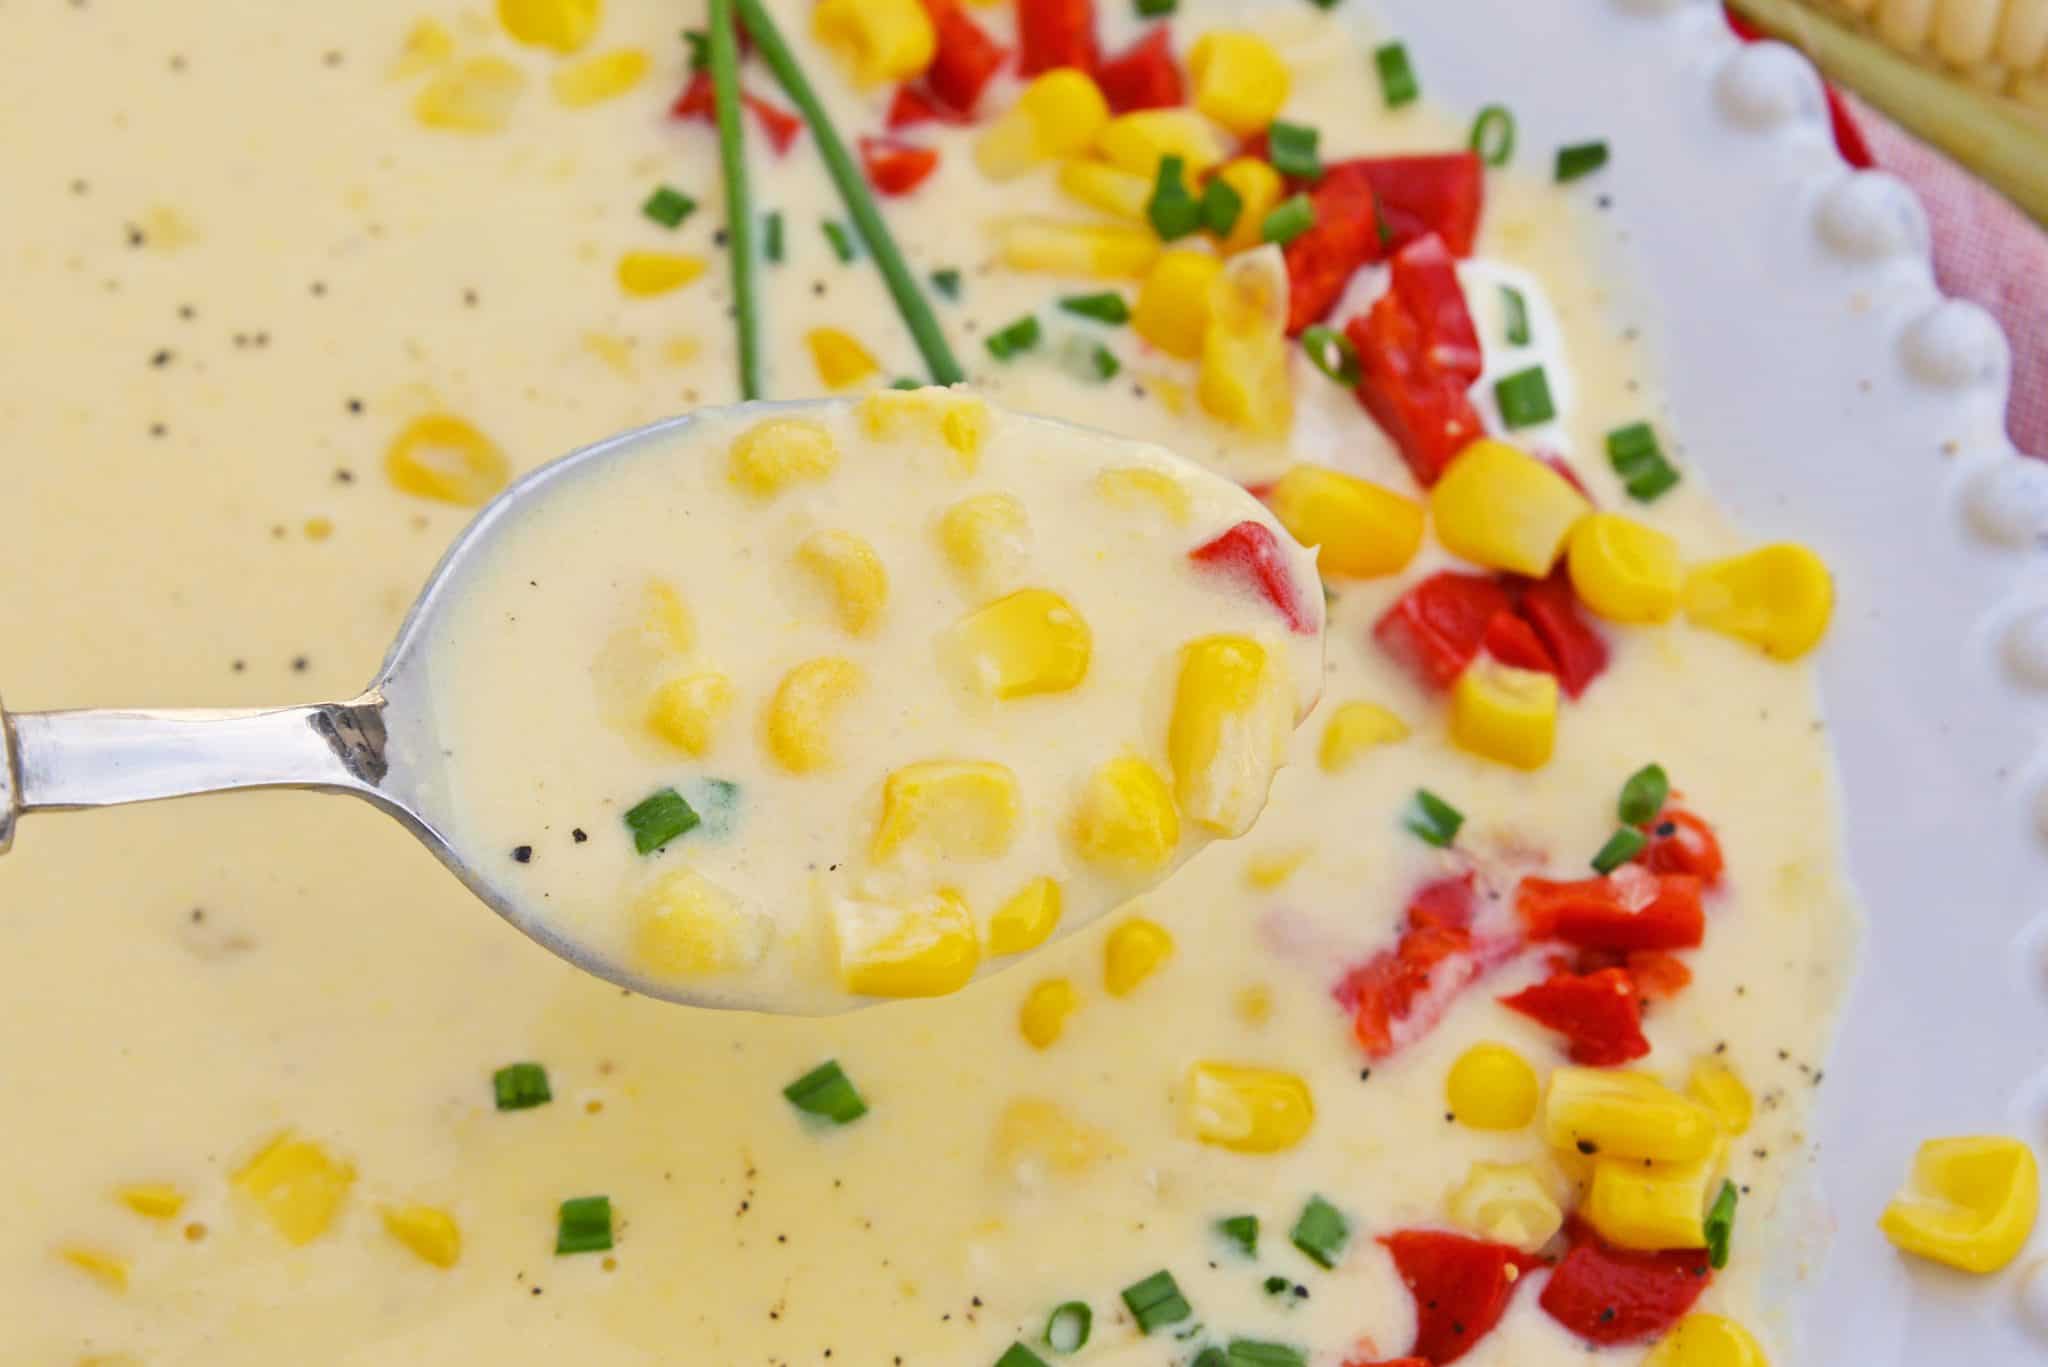 Instant Pot Corn Chowder turns an already easy corn chowder recipe into a quick, FLAVORFUL and delicious potato corn chowder. Perfect for fall! #cornchowderrecipe #instantpotcornchowder #potatocornchowder www.savoryexperiments.com 